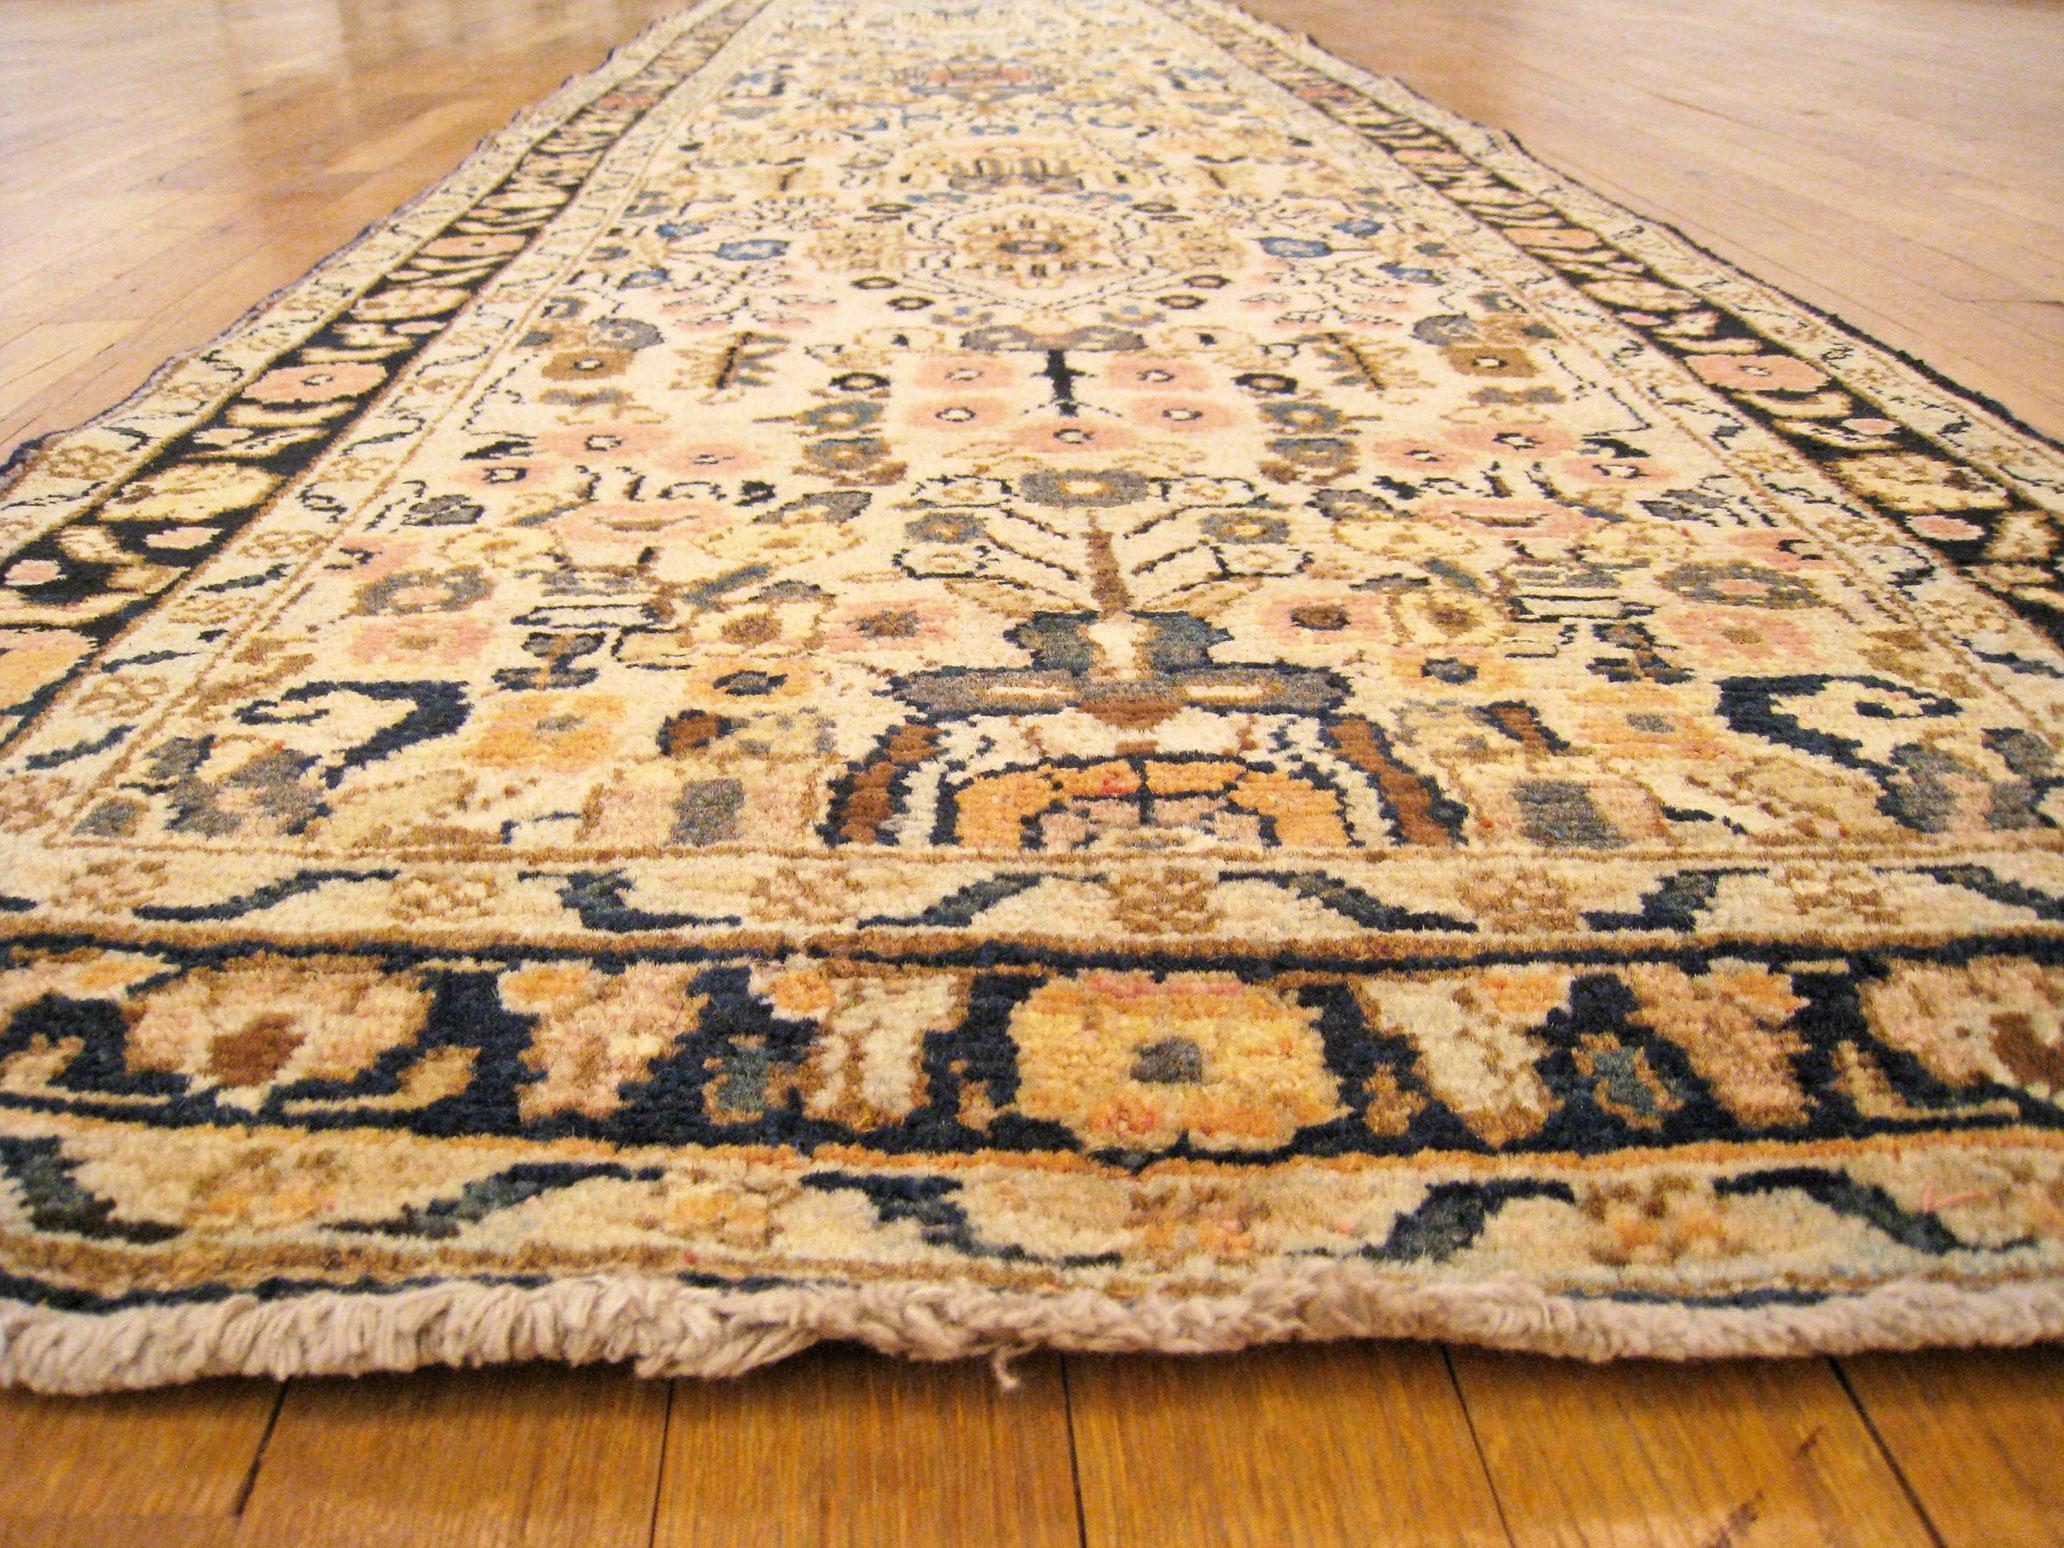 Antique Persian Hamadan Oriental Rug, in Runner size, with Soft Colors & Foliate For Sale 2